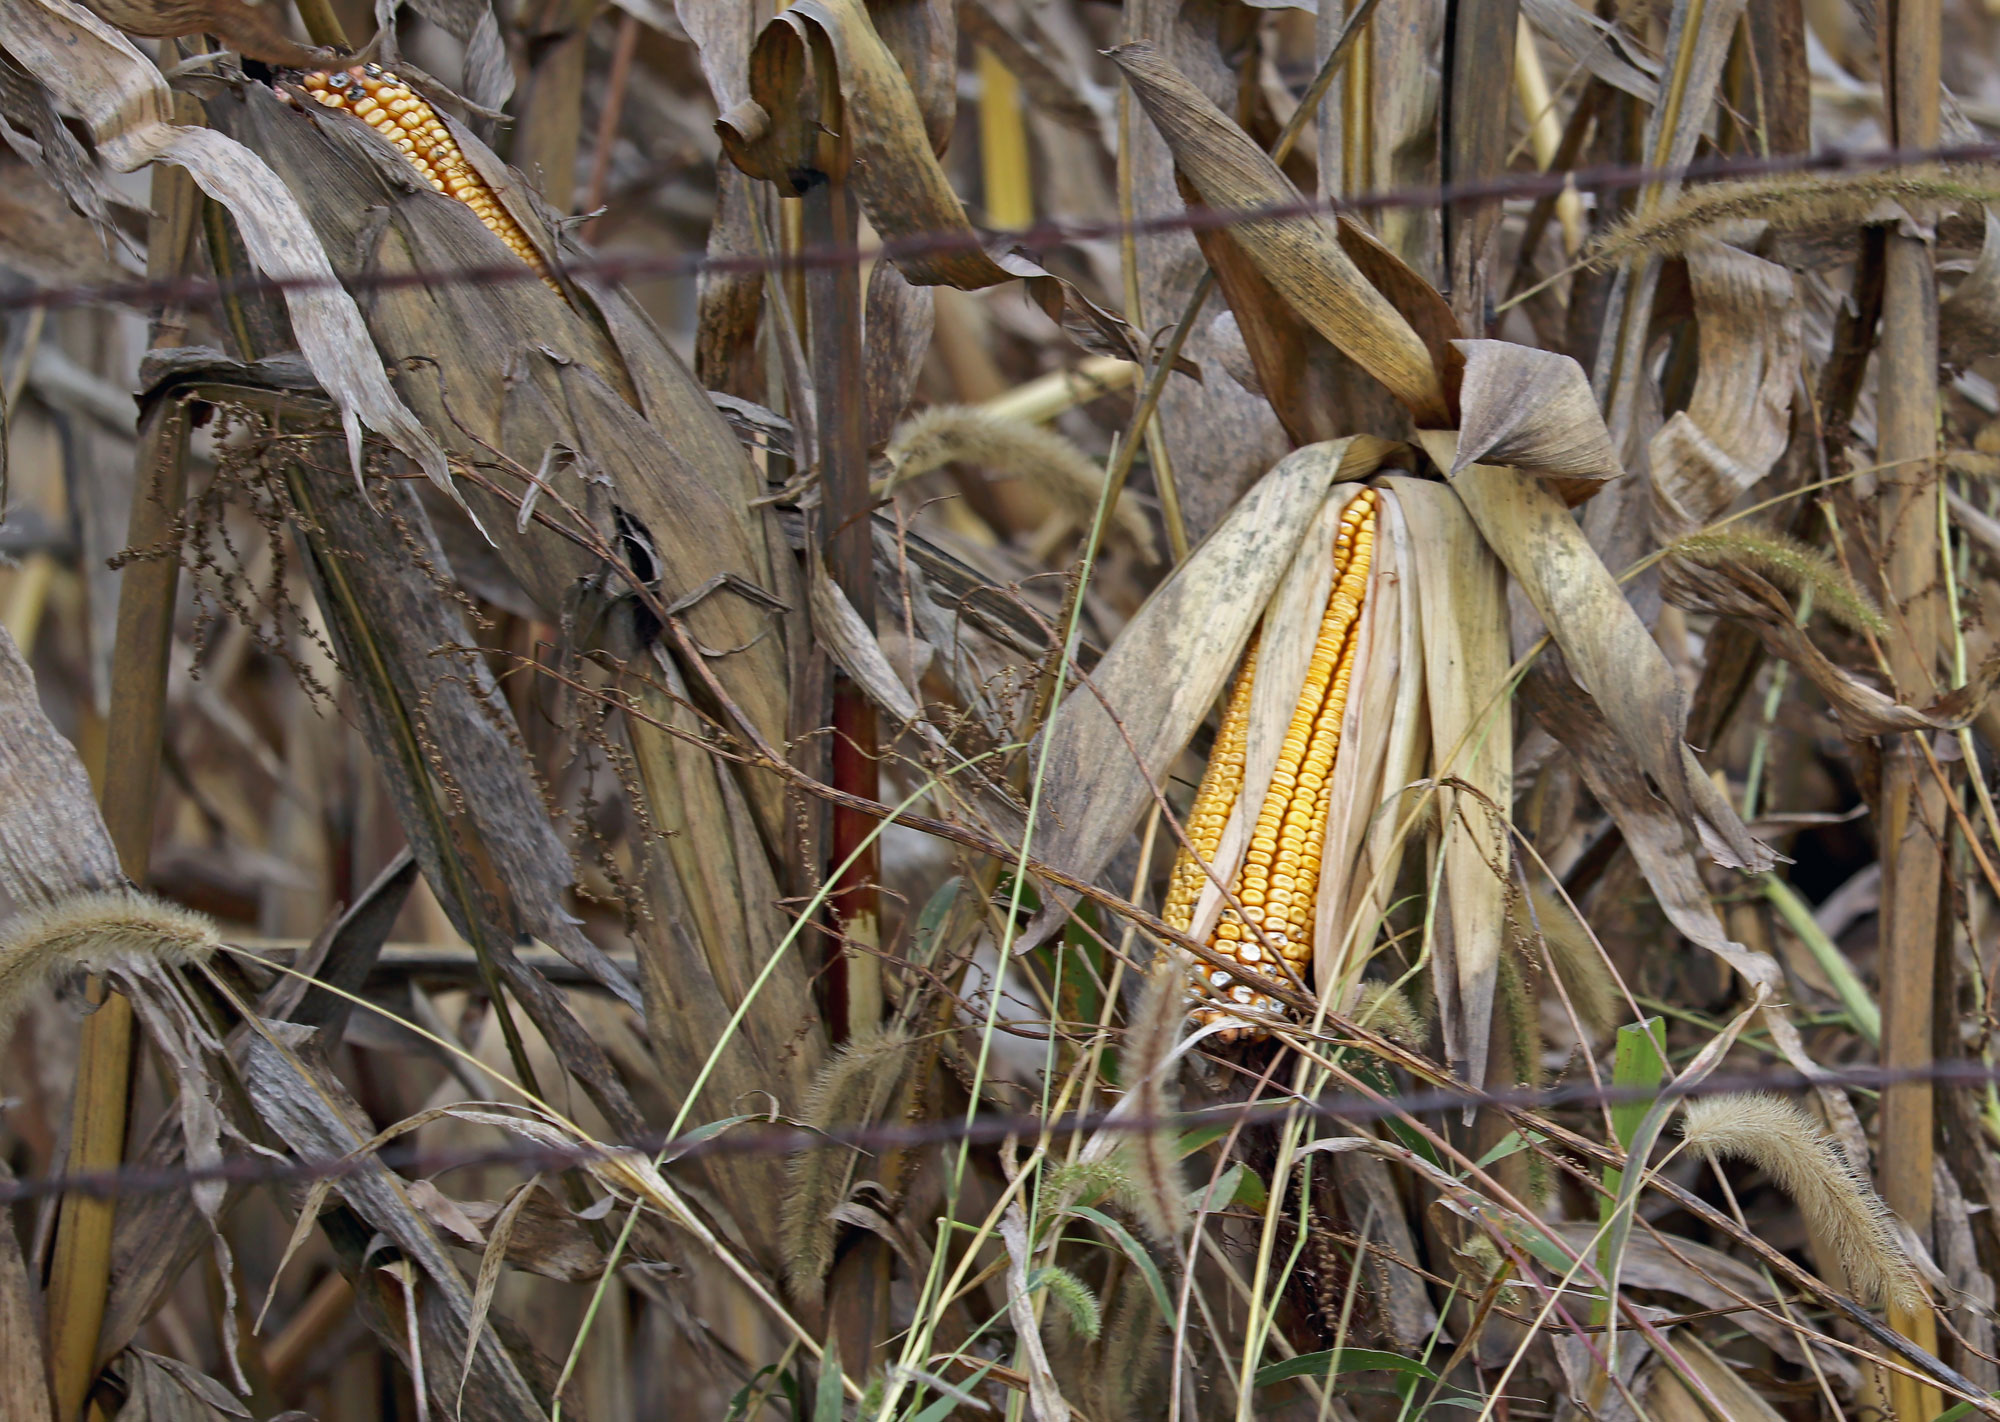 Close-up photograph of maize plants standing in a field. One of the plants nearest the camera has a ear of maize with the husk partially open, exposing the dented kernels.